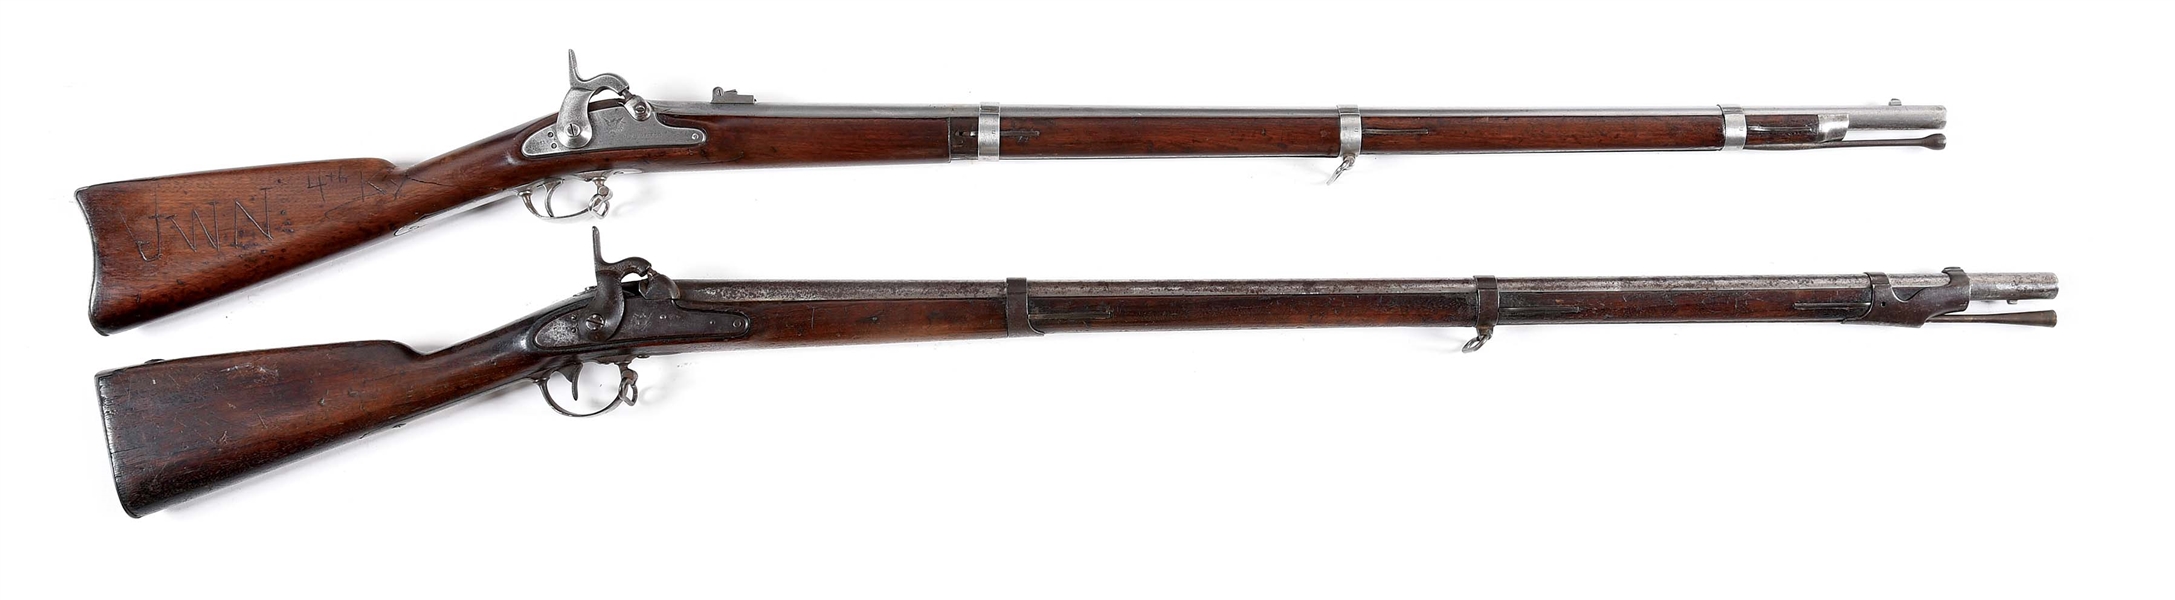 (A) LOT OF 2: SPRINGFIELD ARMORY 1861 AND HARPERS FERRY 1842 PERCUSSION RIFLES.